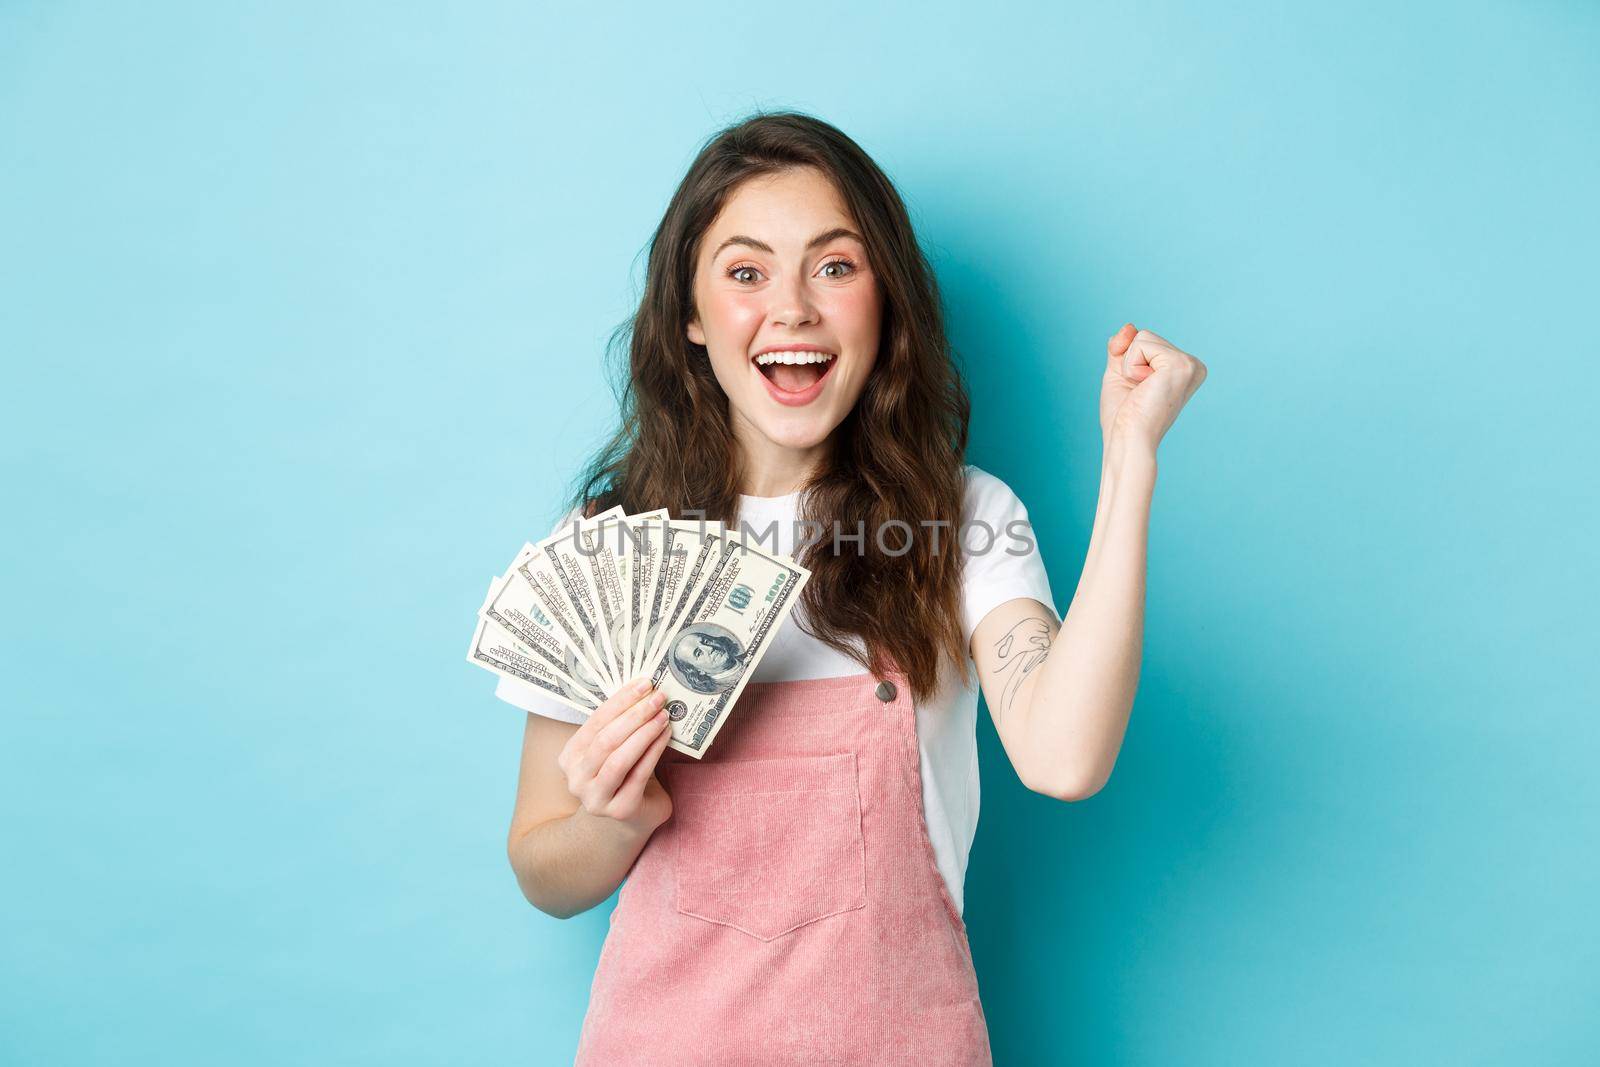 Excited smiling girl fist pump and hold money prize, winning cash, receive income from something, standing happy against blue background.